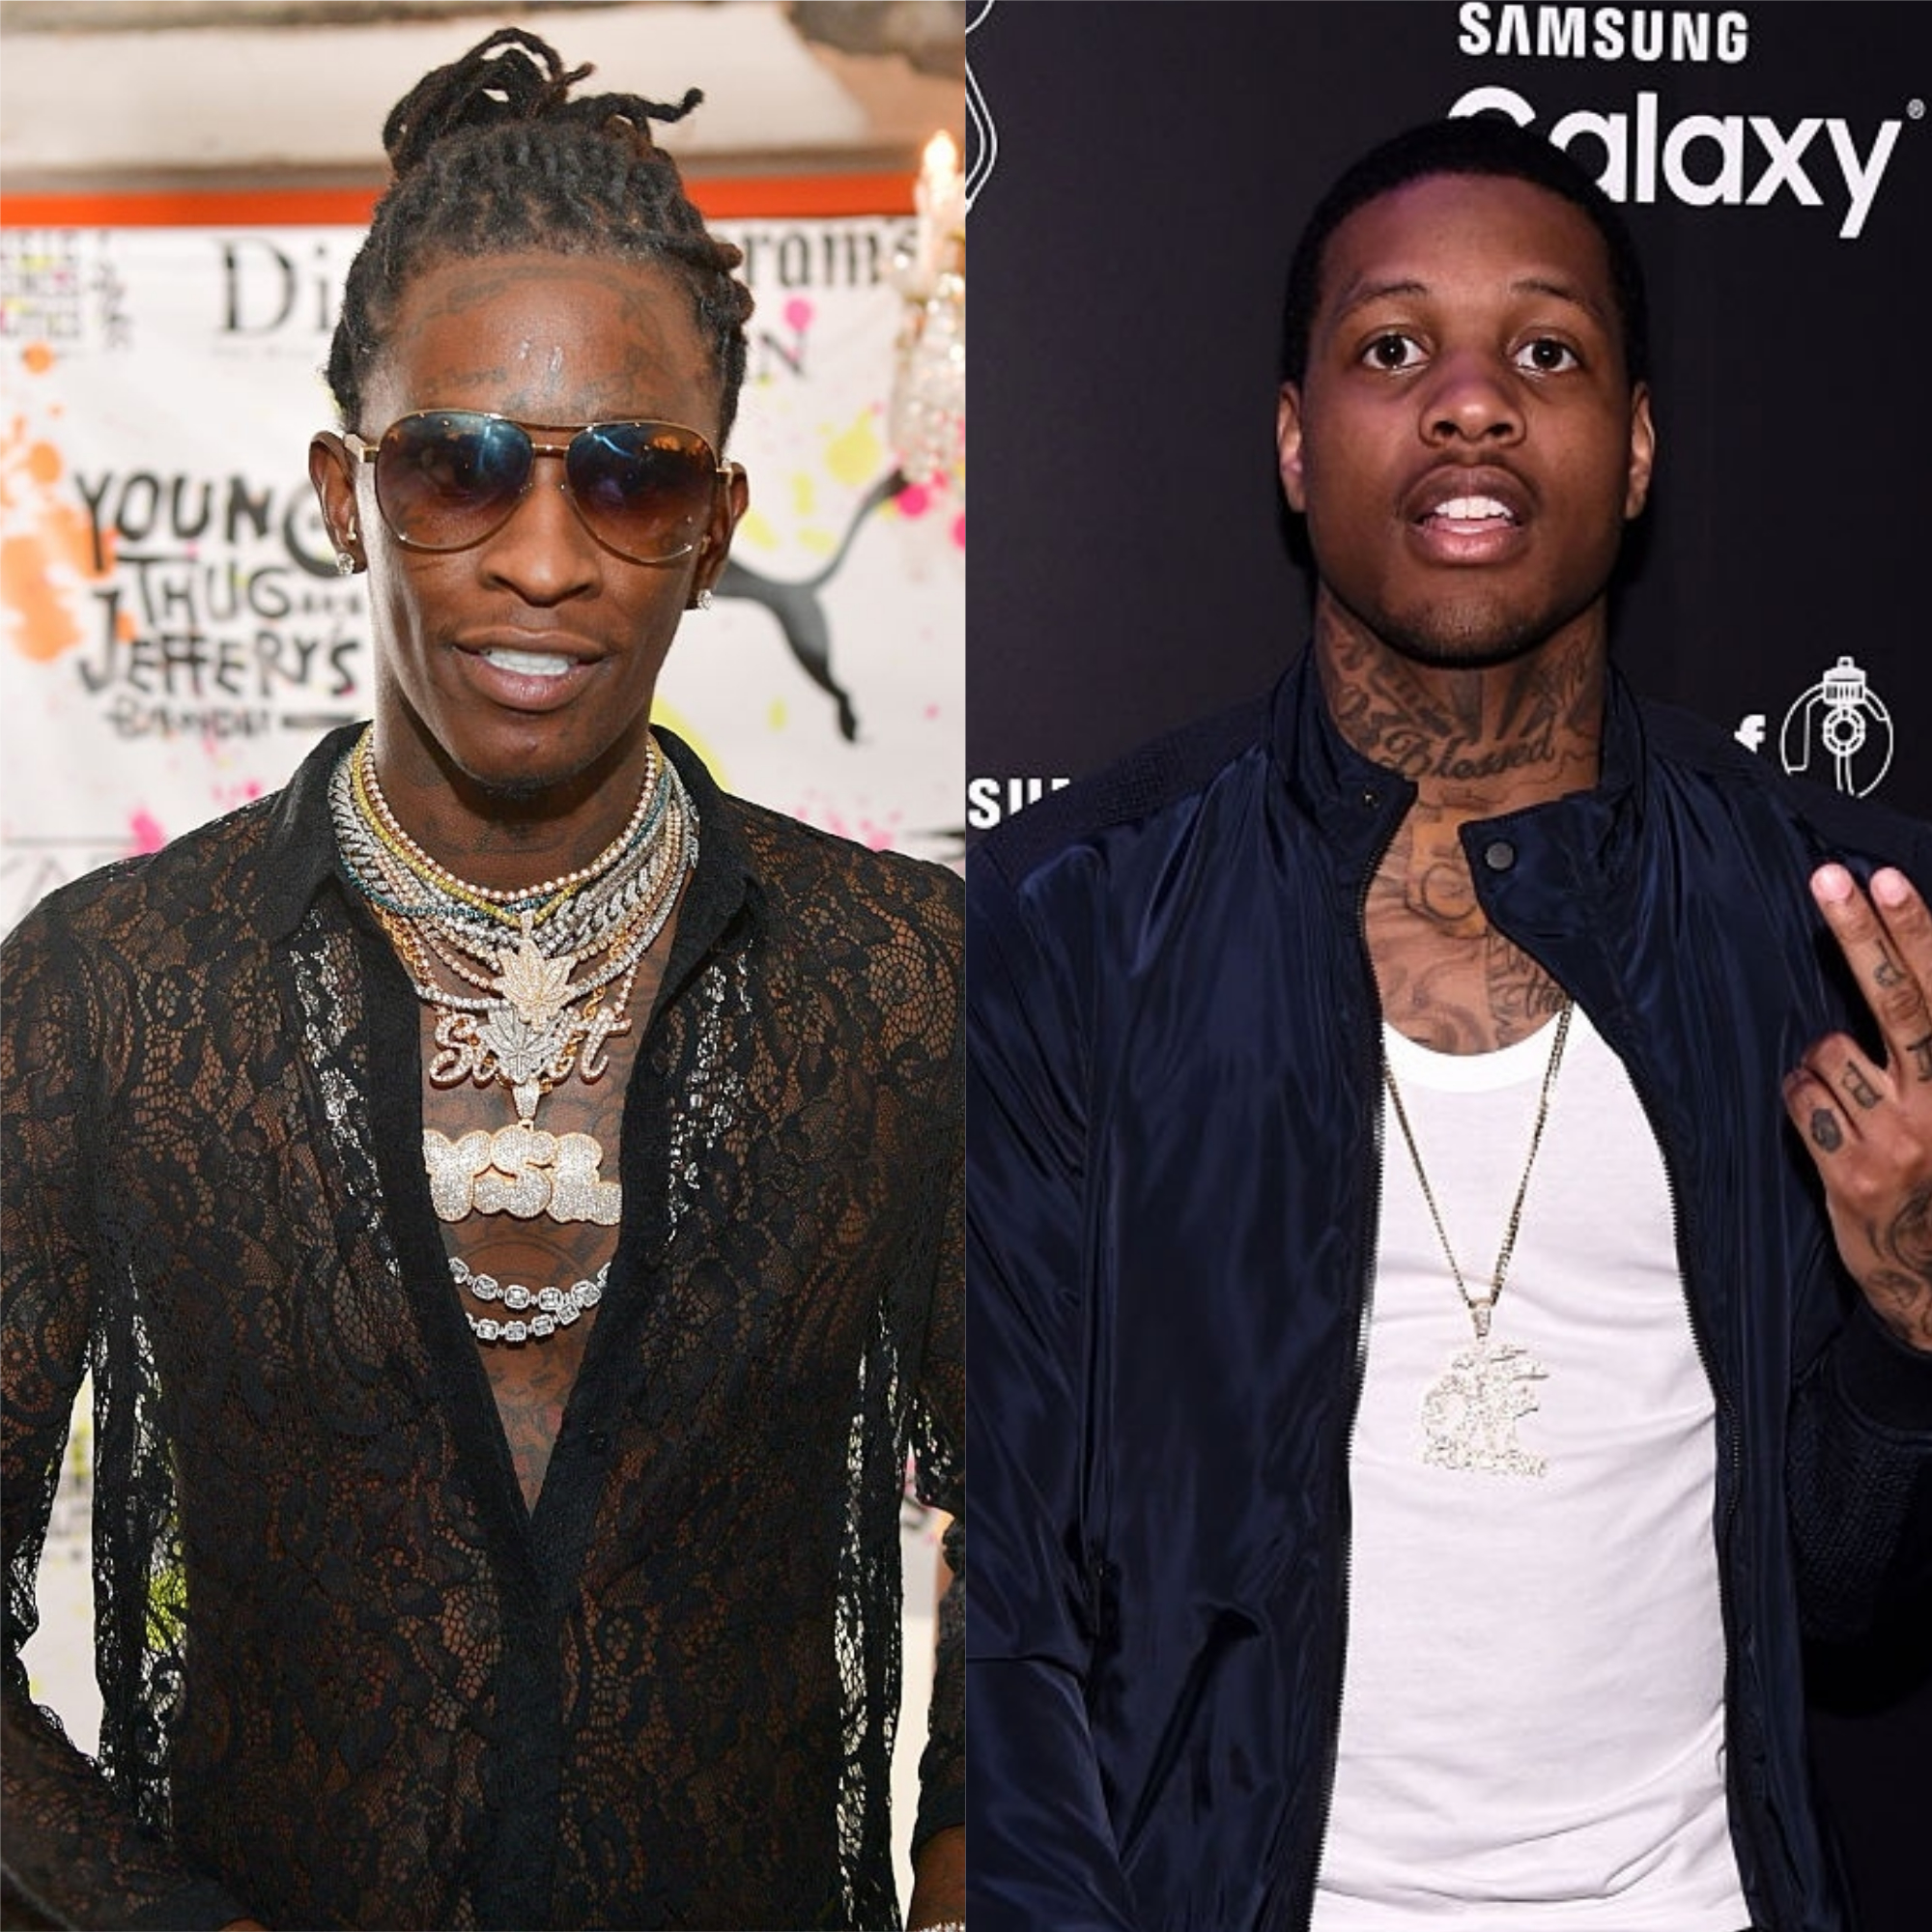 Lil Durk Reveals What He & Young Thug Were Looking At In Popular Meme